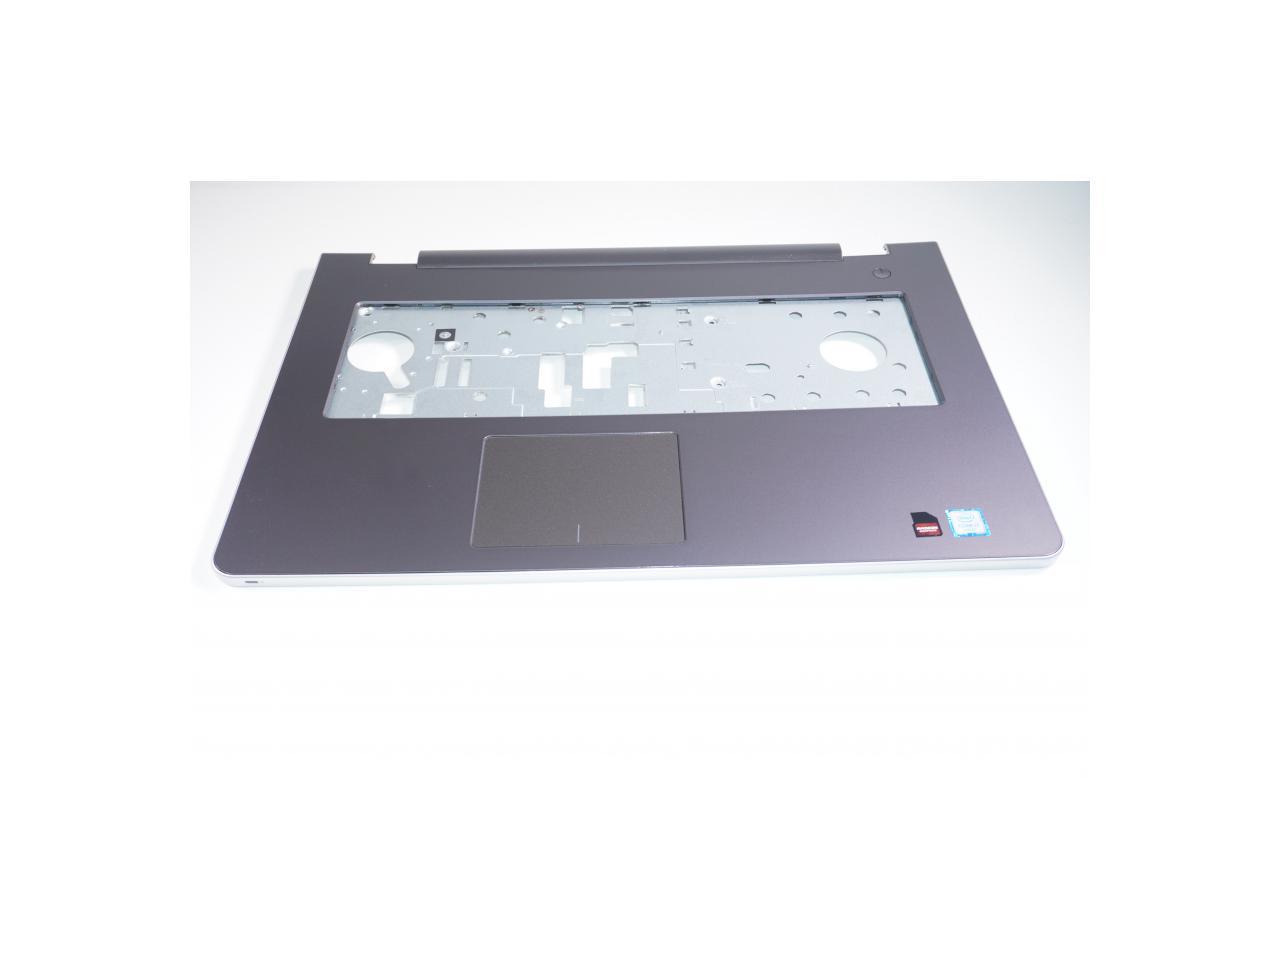 GFYHH Dell Palmrest Top Cover I5758 17 5758